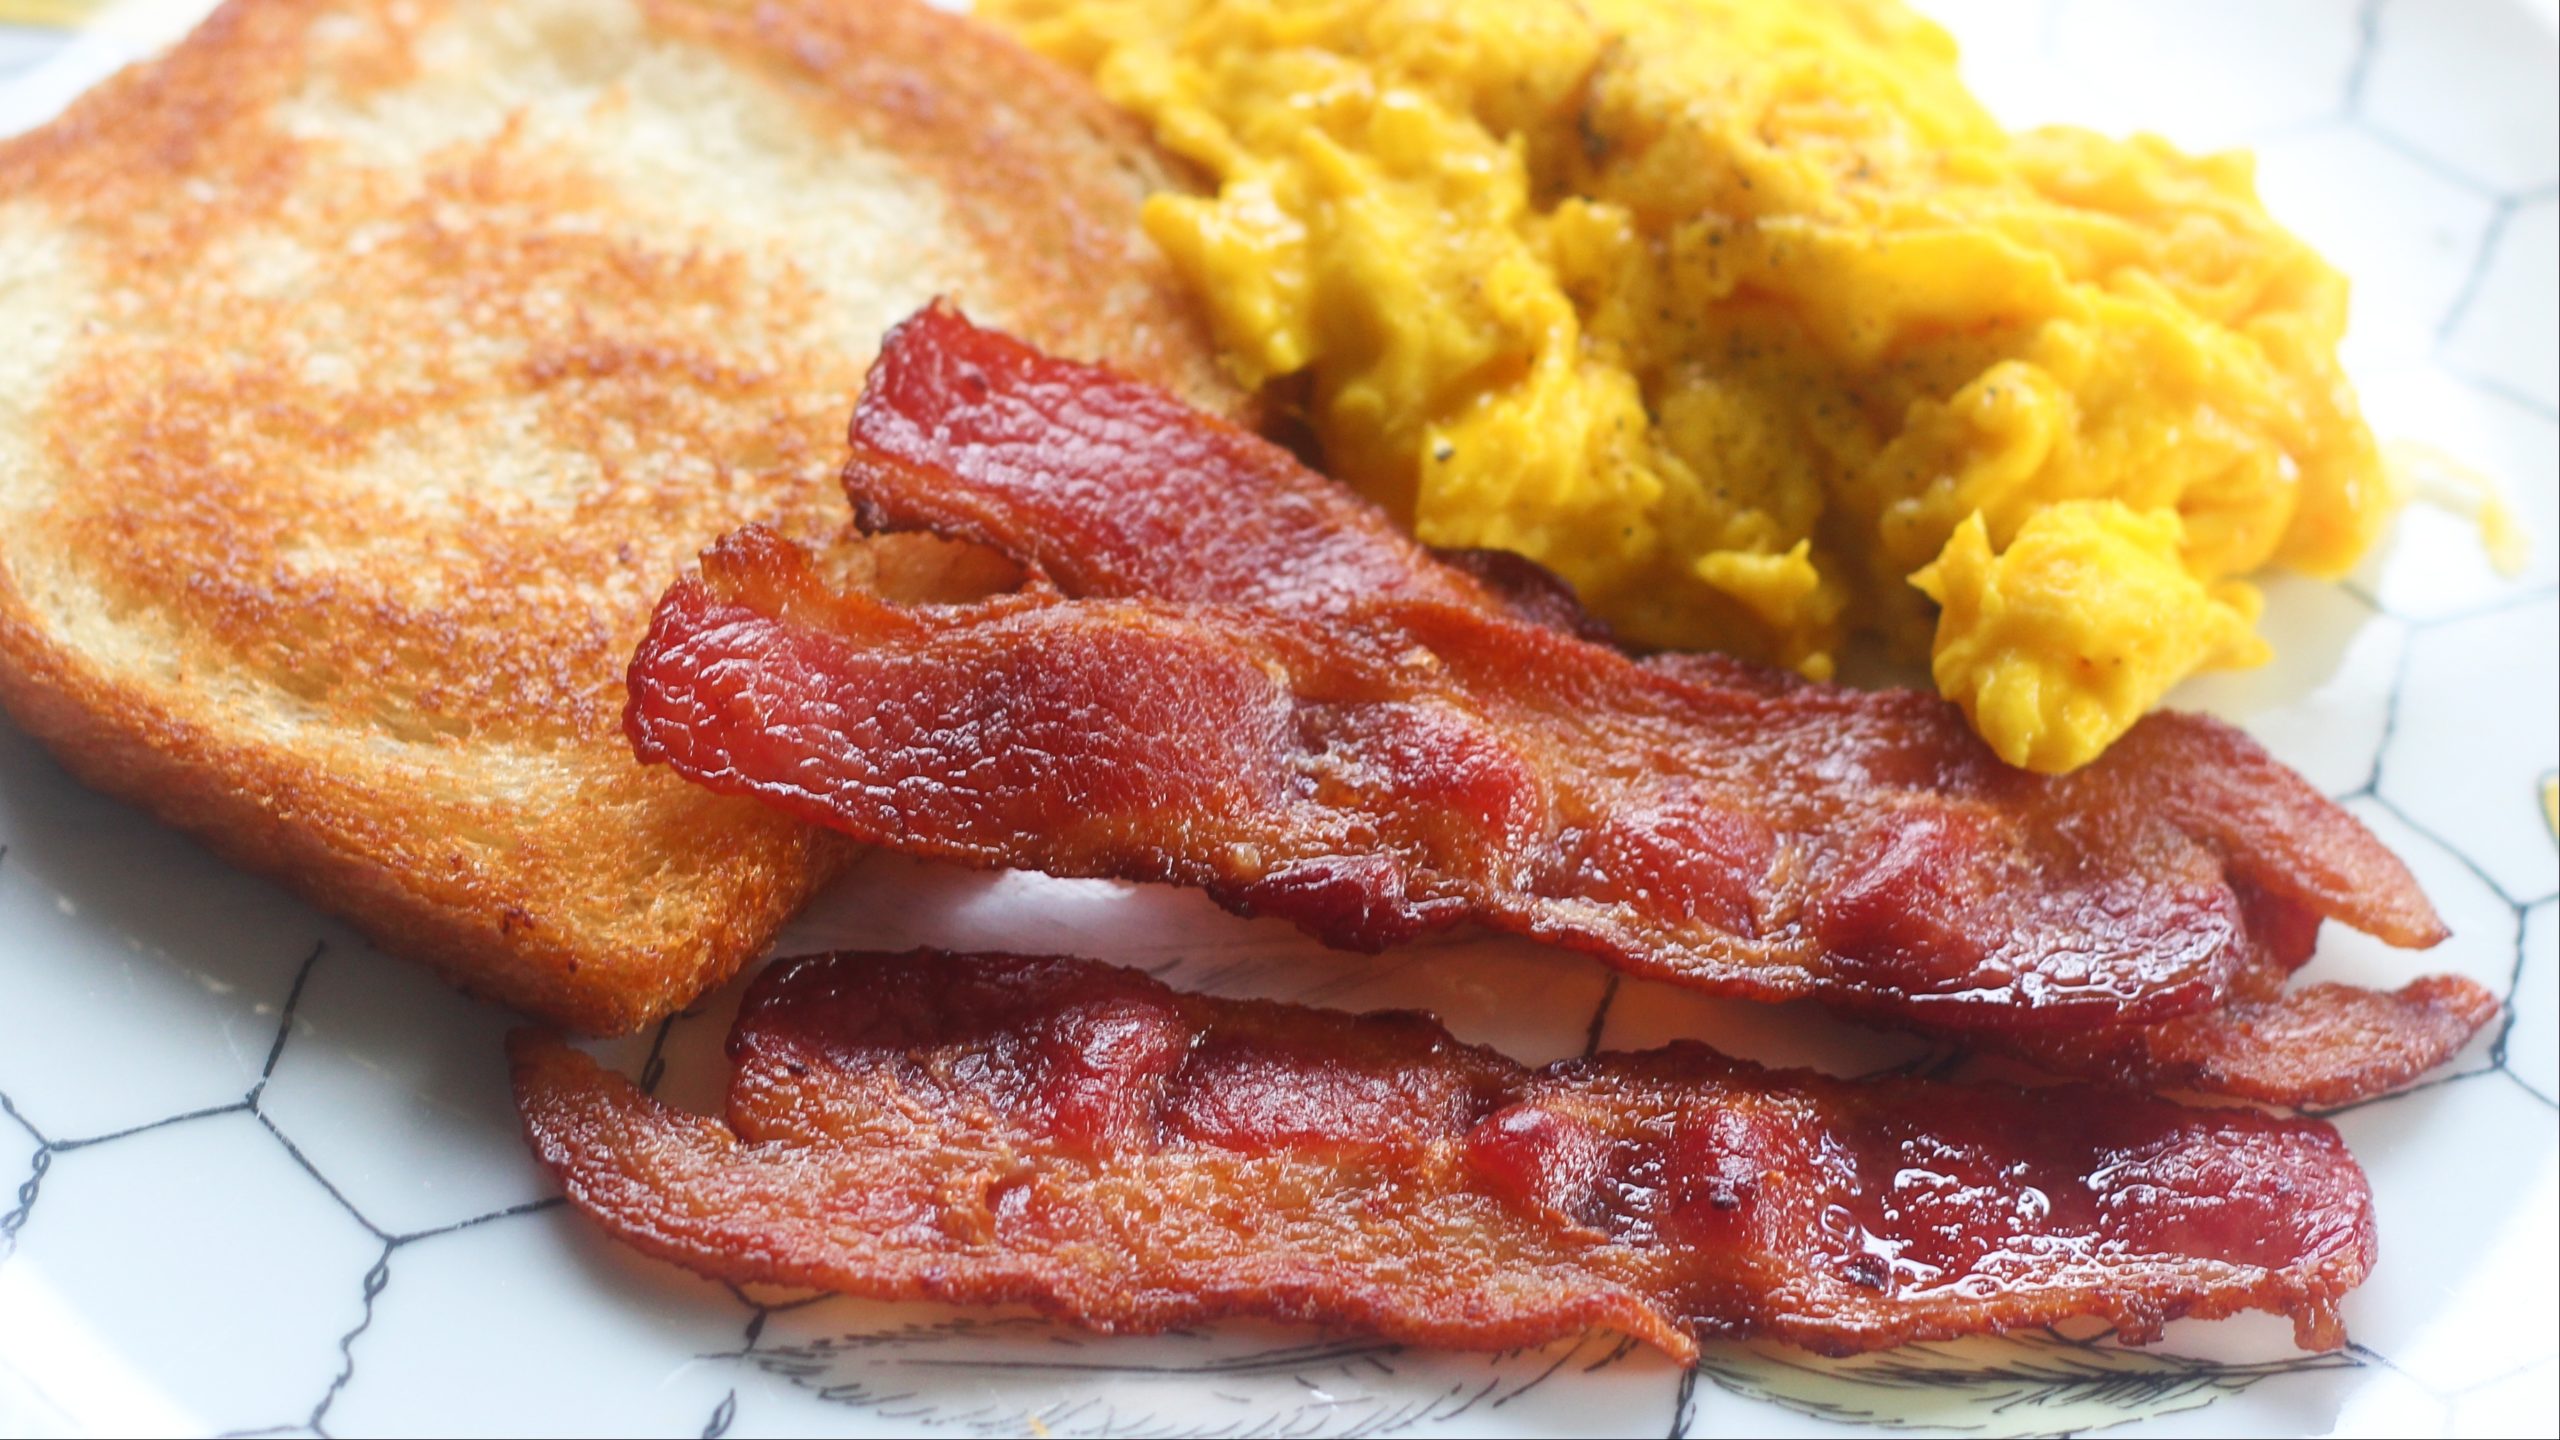 Bacon Is the Key to This One-Pan Breakfast